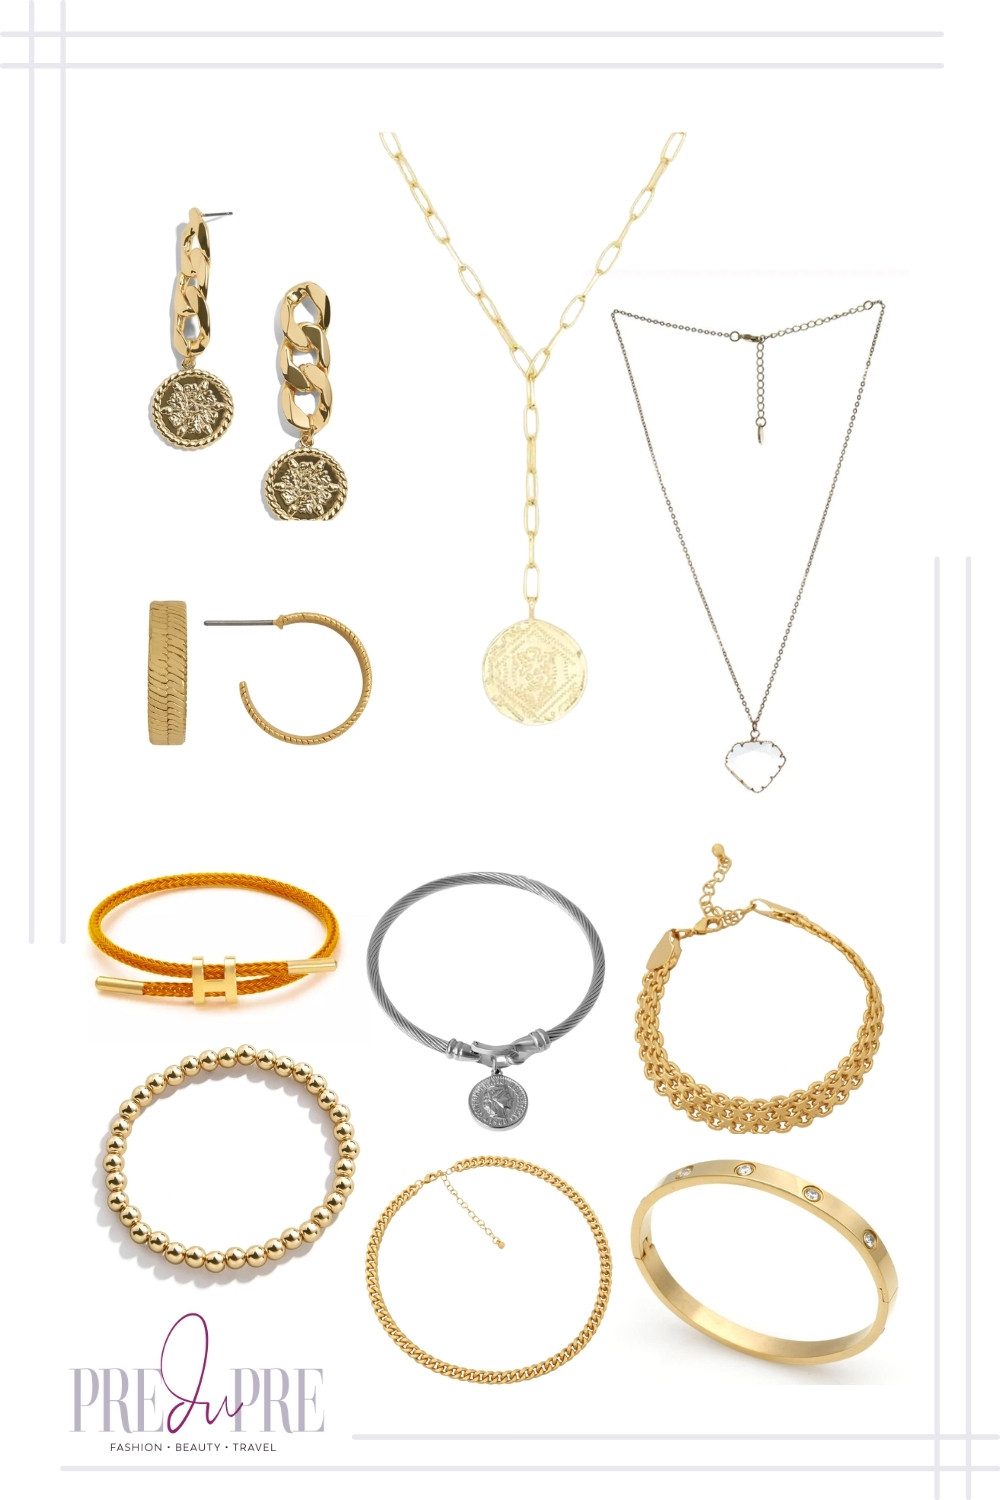 The Styled Collection jewelry accessories